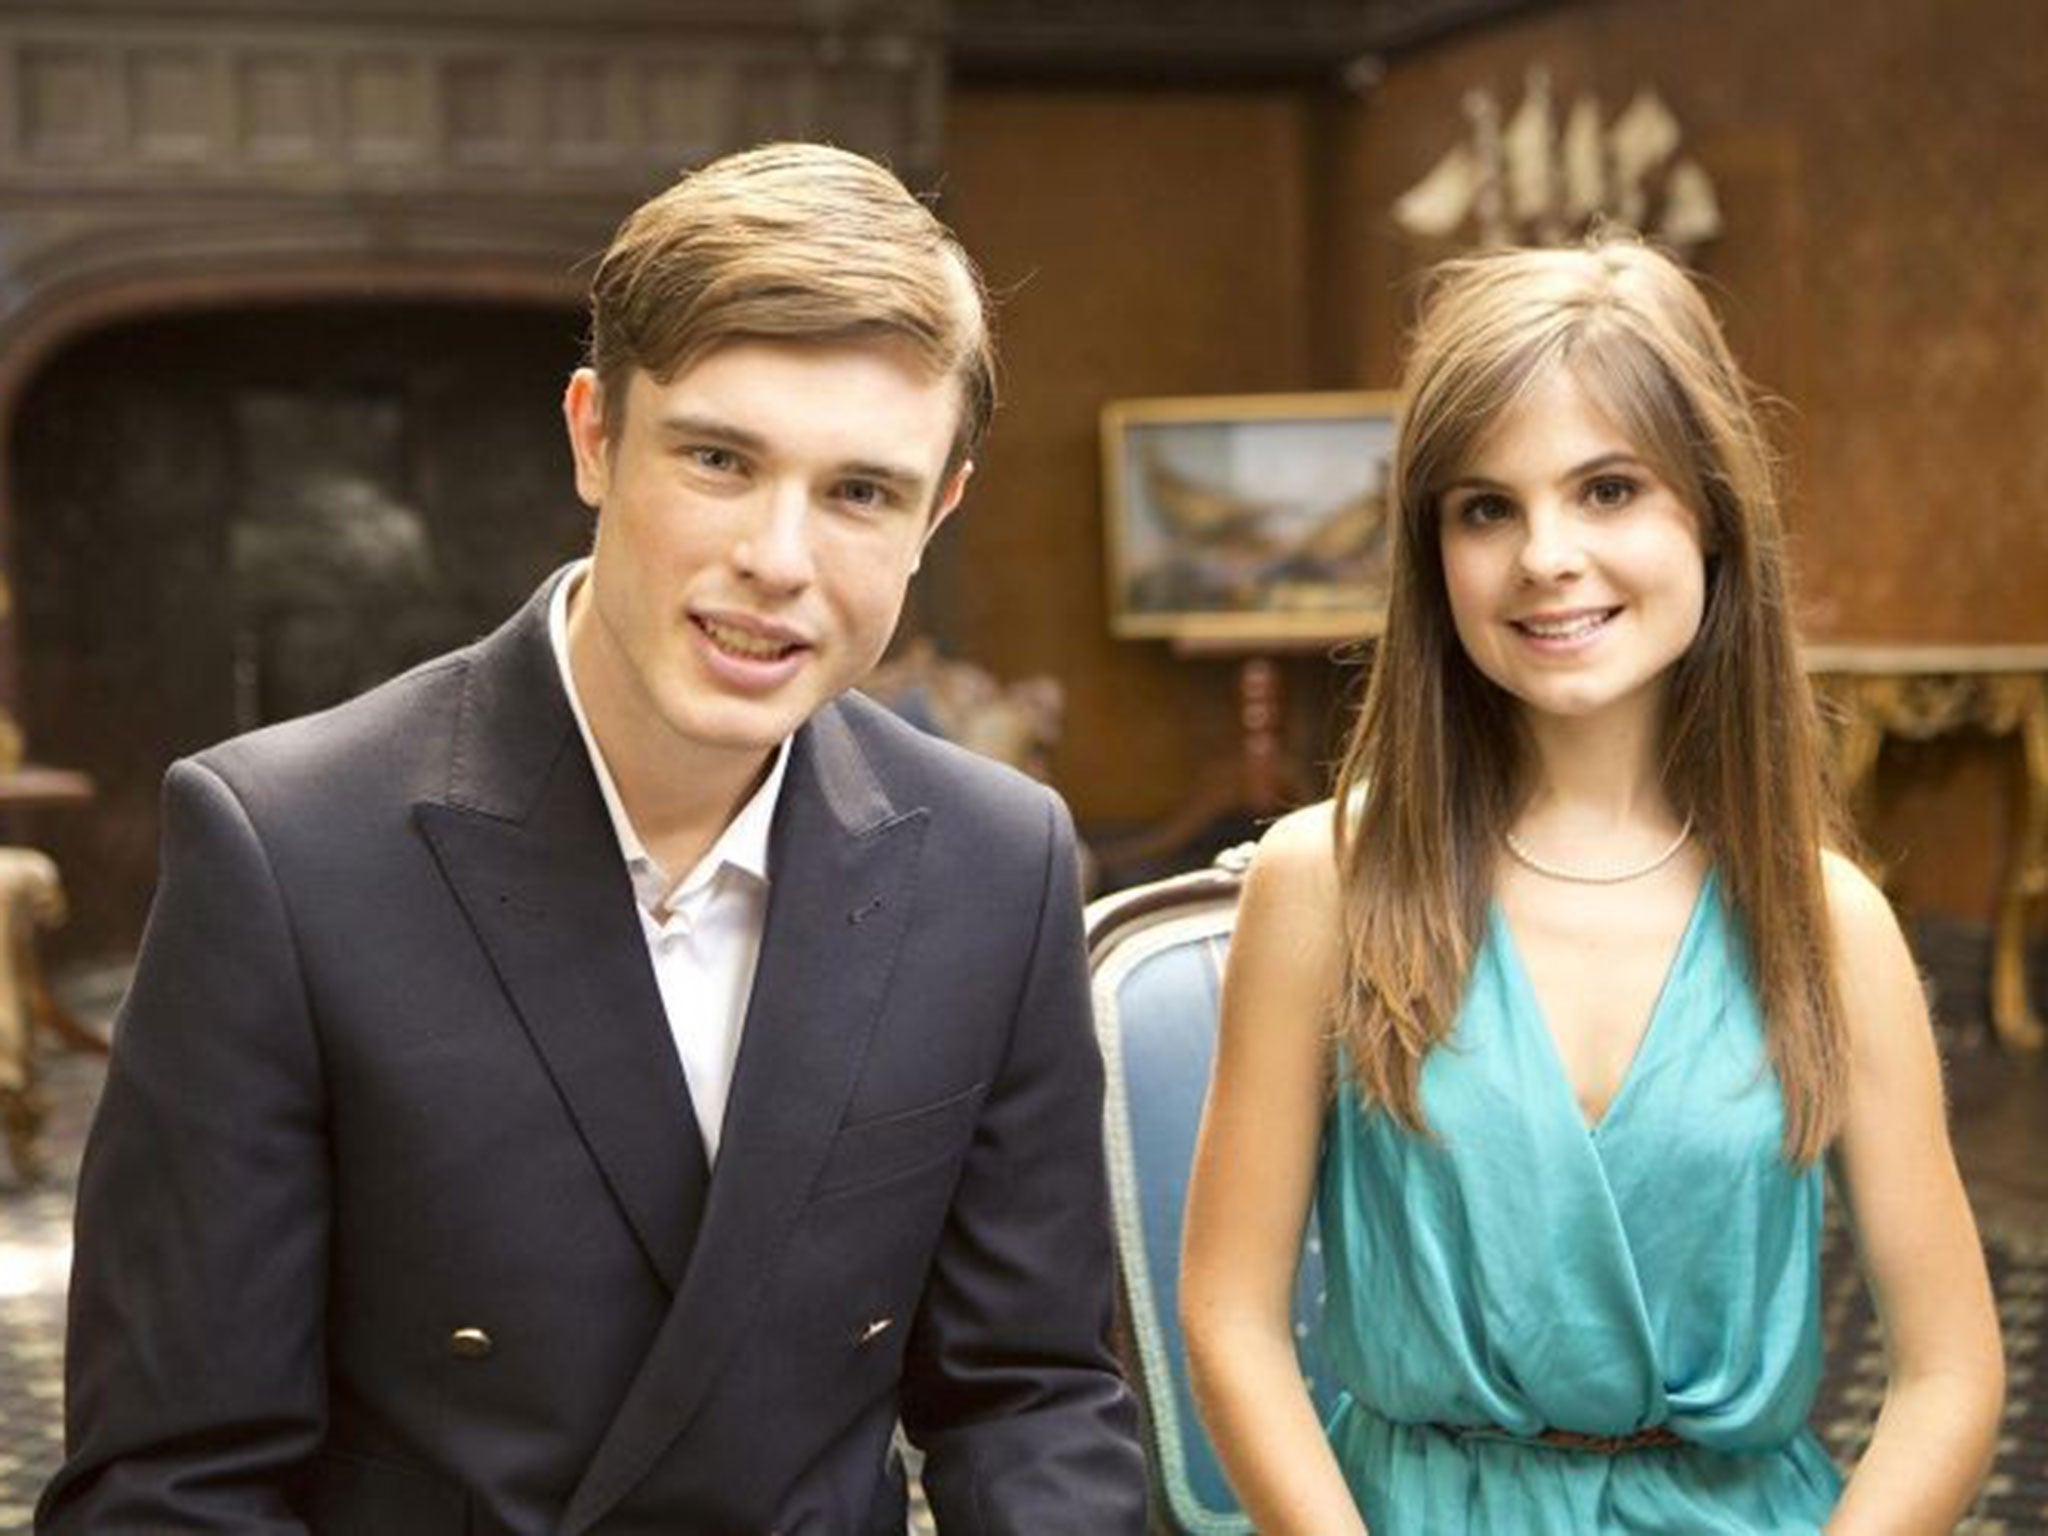 Cast: Ed Gamble and Amy Hoggart as Georgie and Poppy Carlton in ‘Almost Royal’